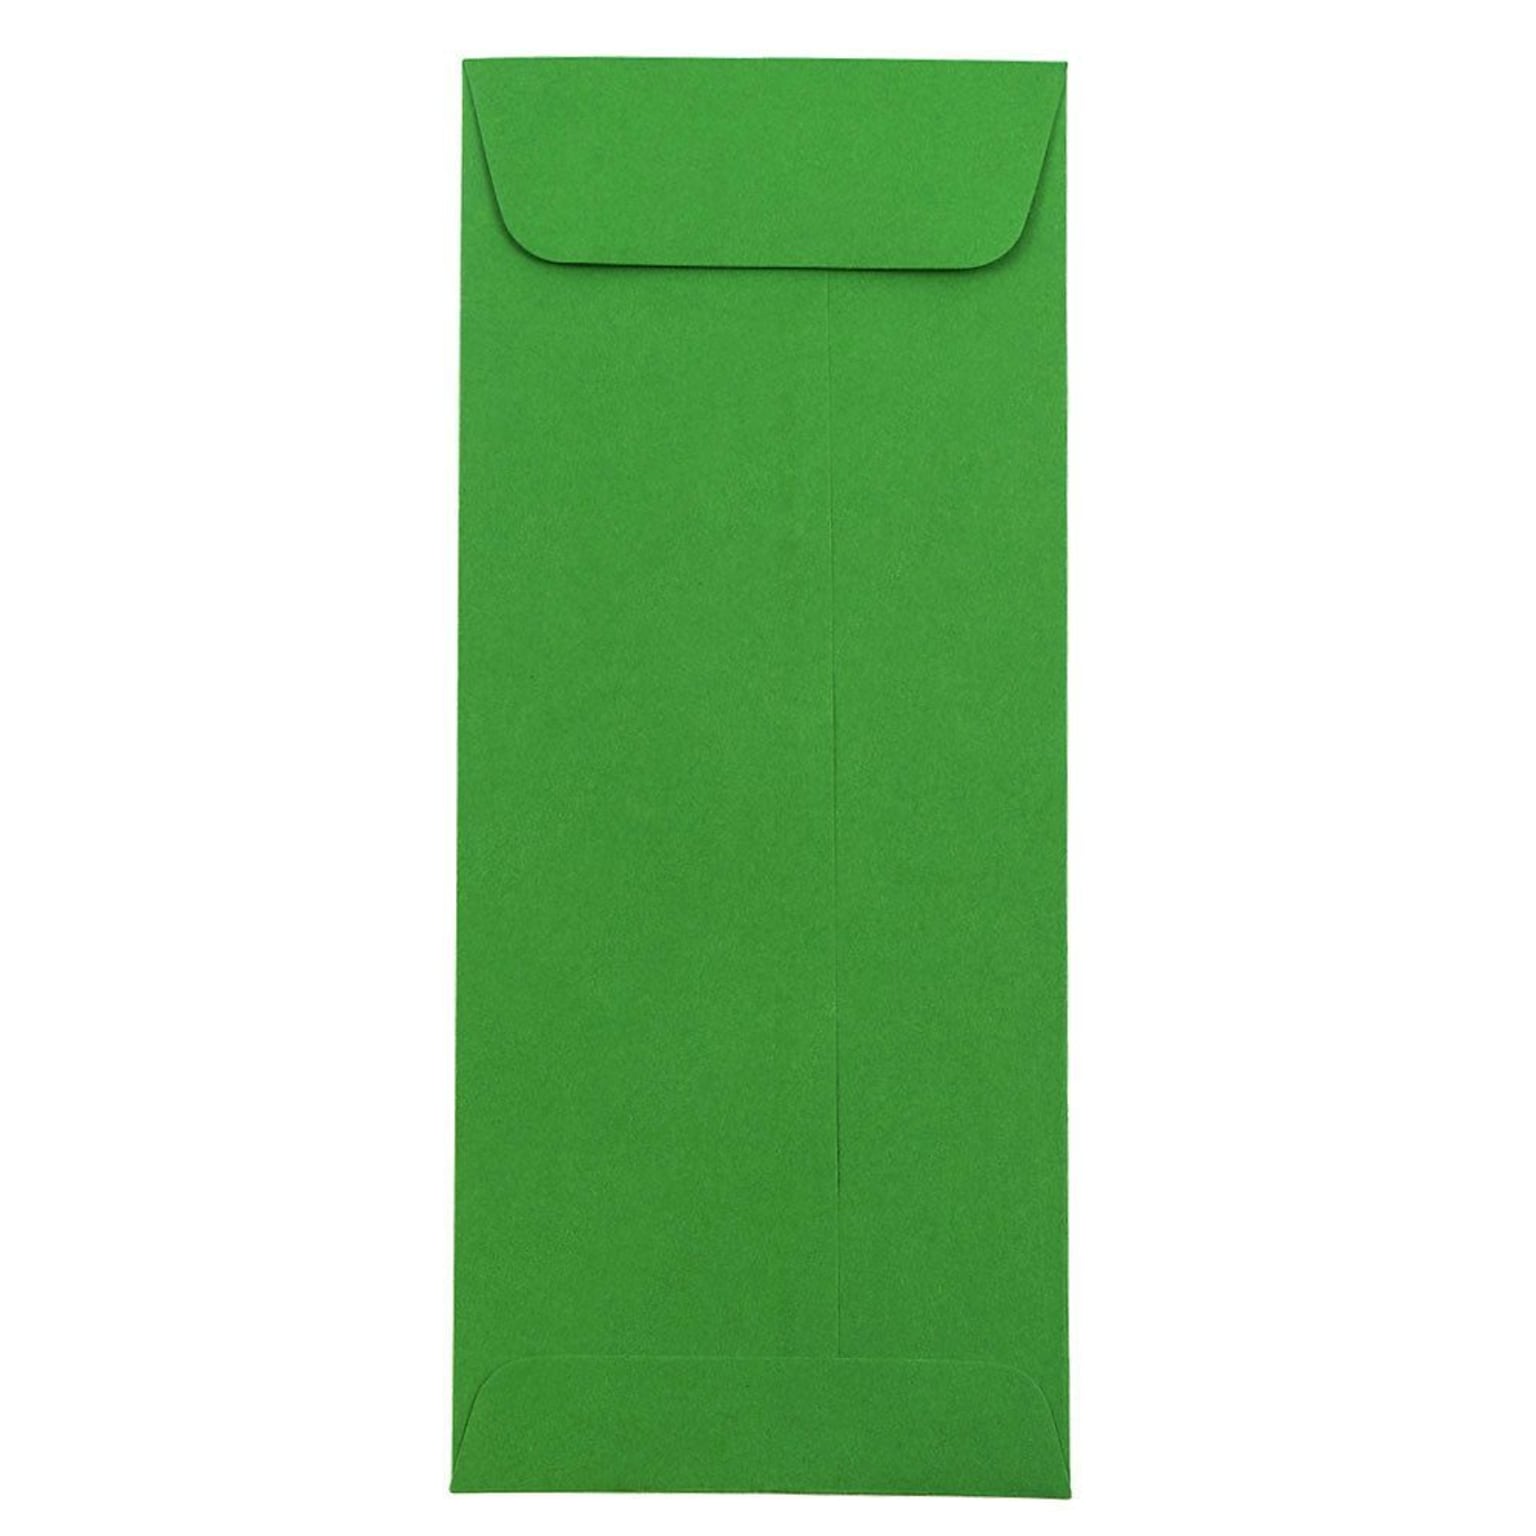 JAM Paper Open End #10 Currency Envelope, 4 1/8 x 9 1/2, Green, 50/Pack (15884I)